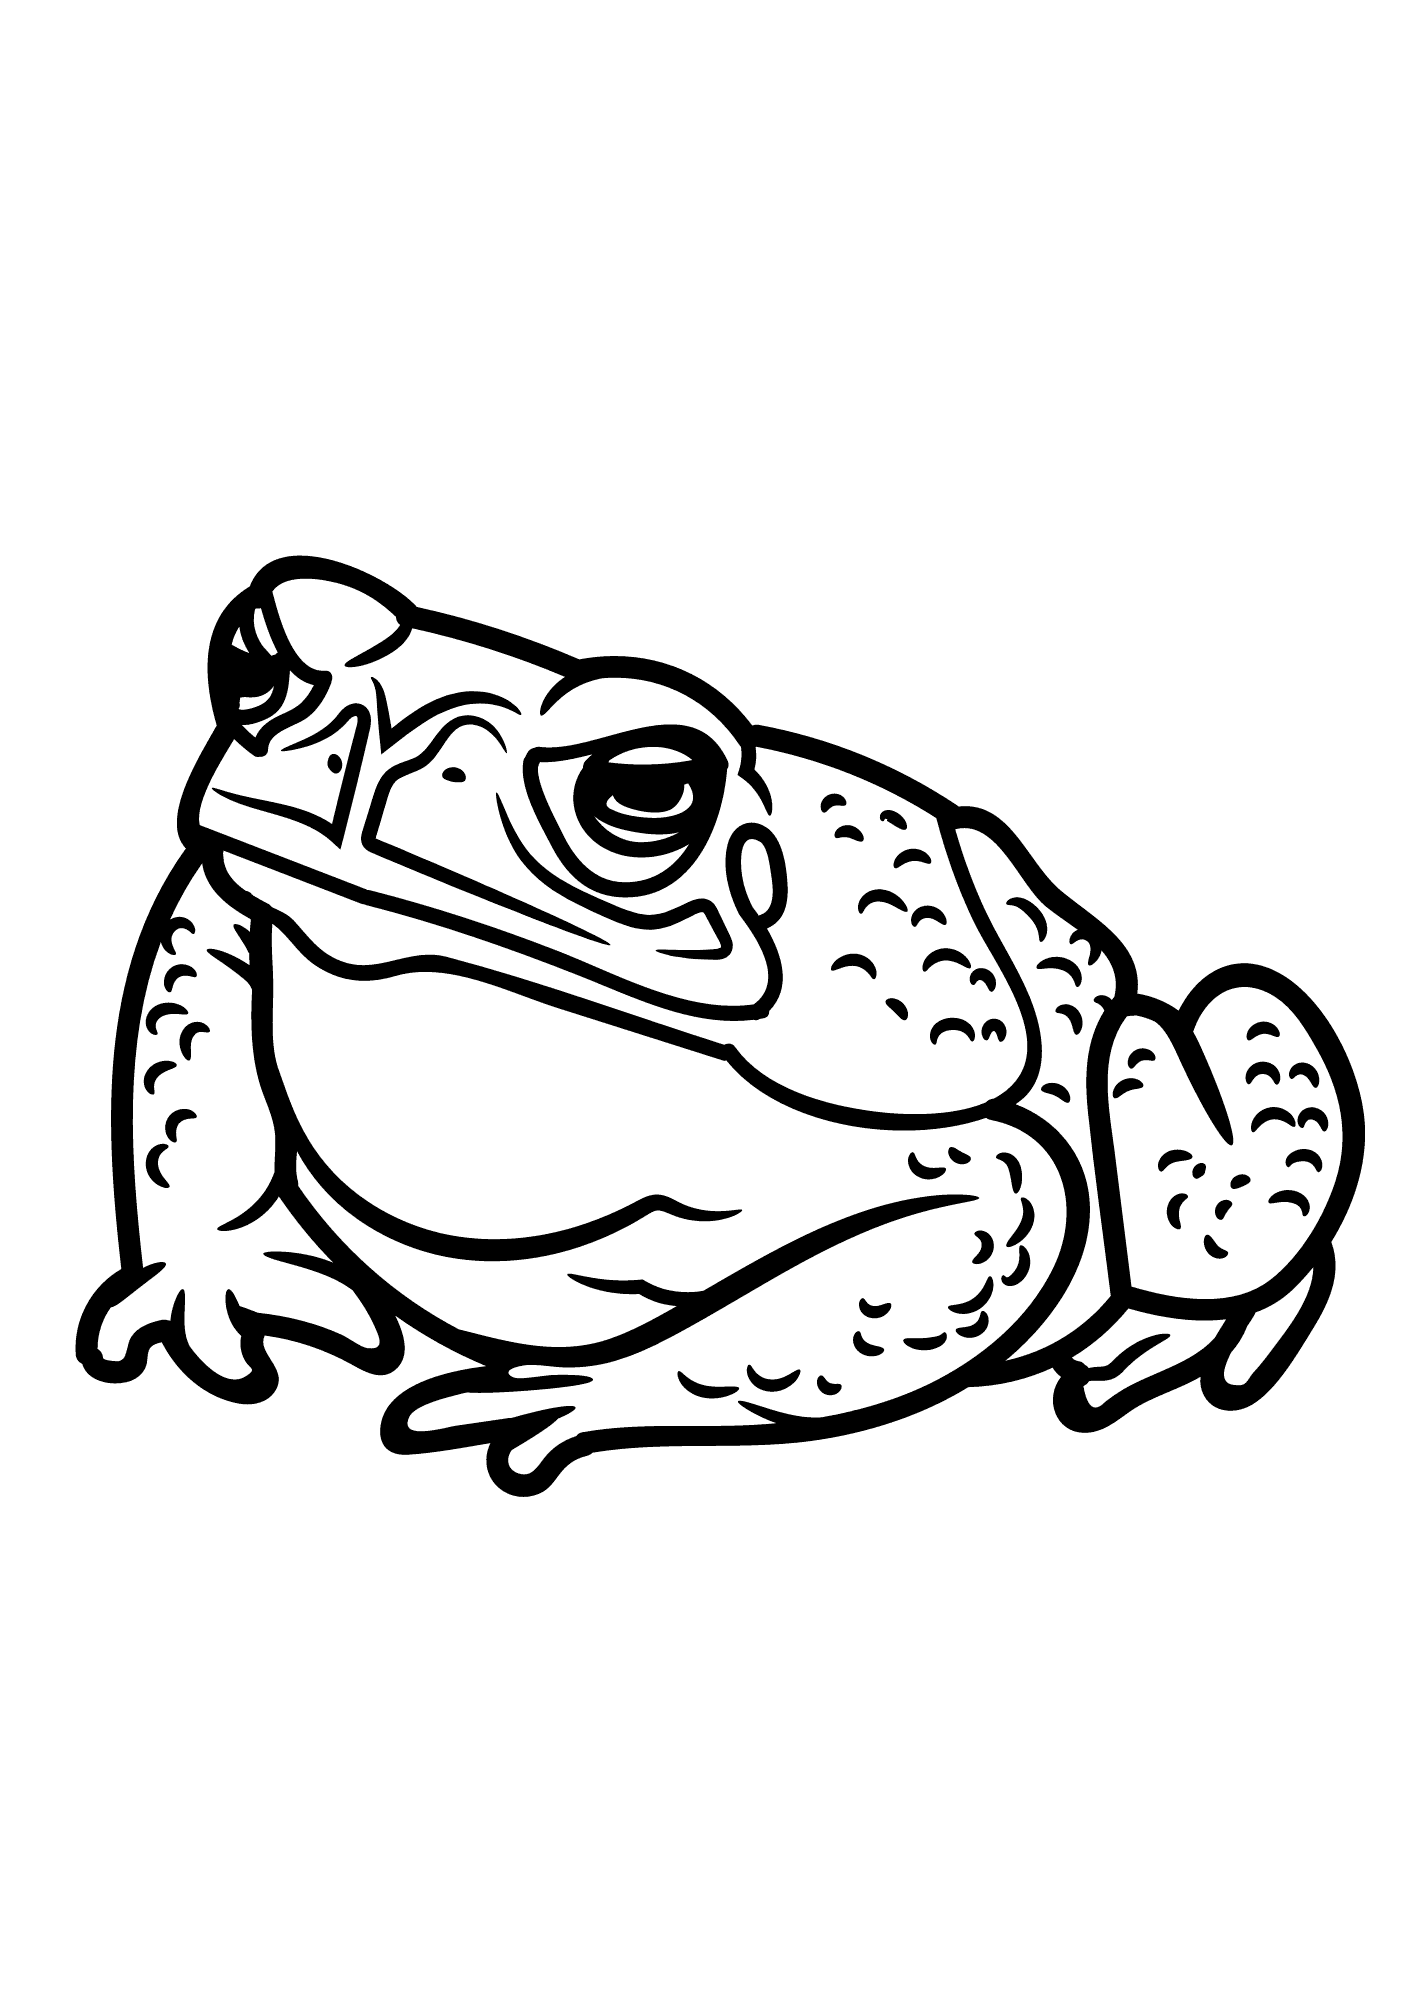 Toad Printable Image Coloring Pages